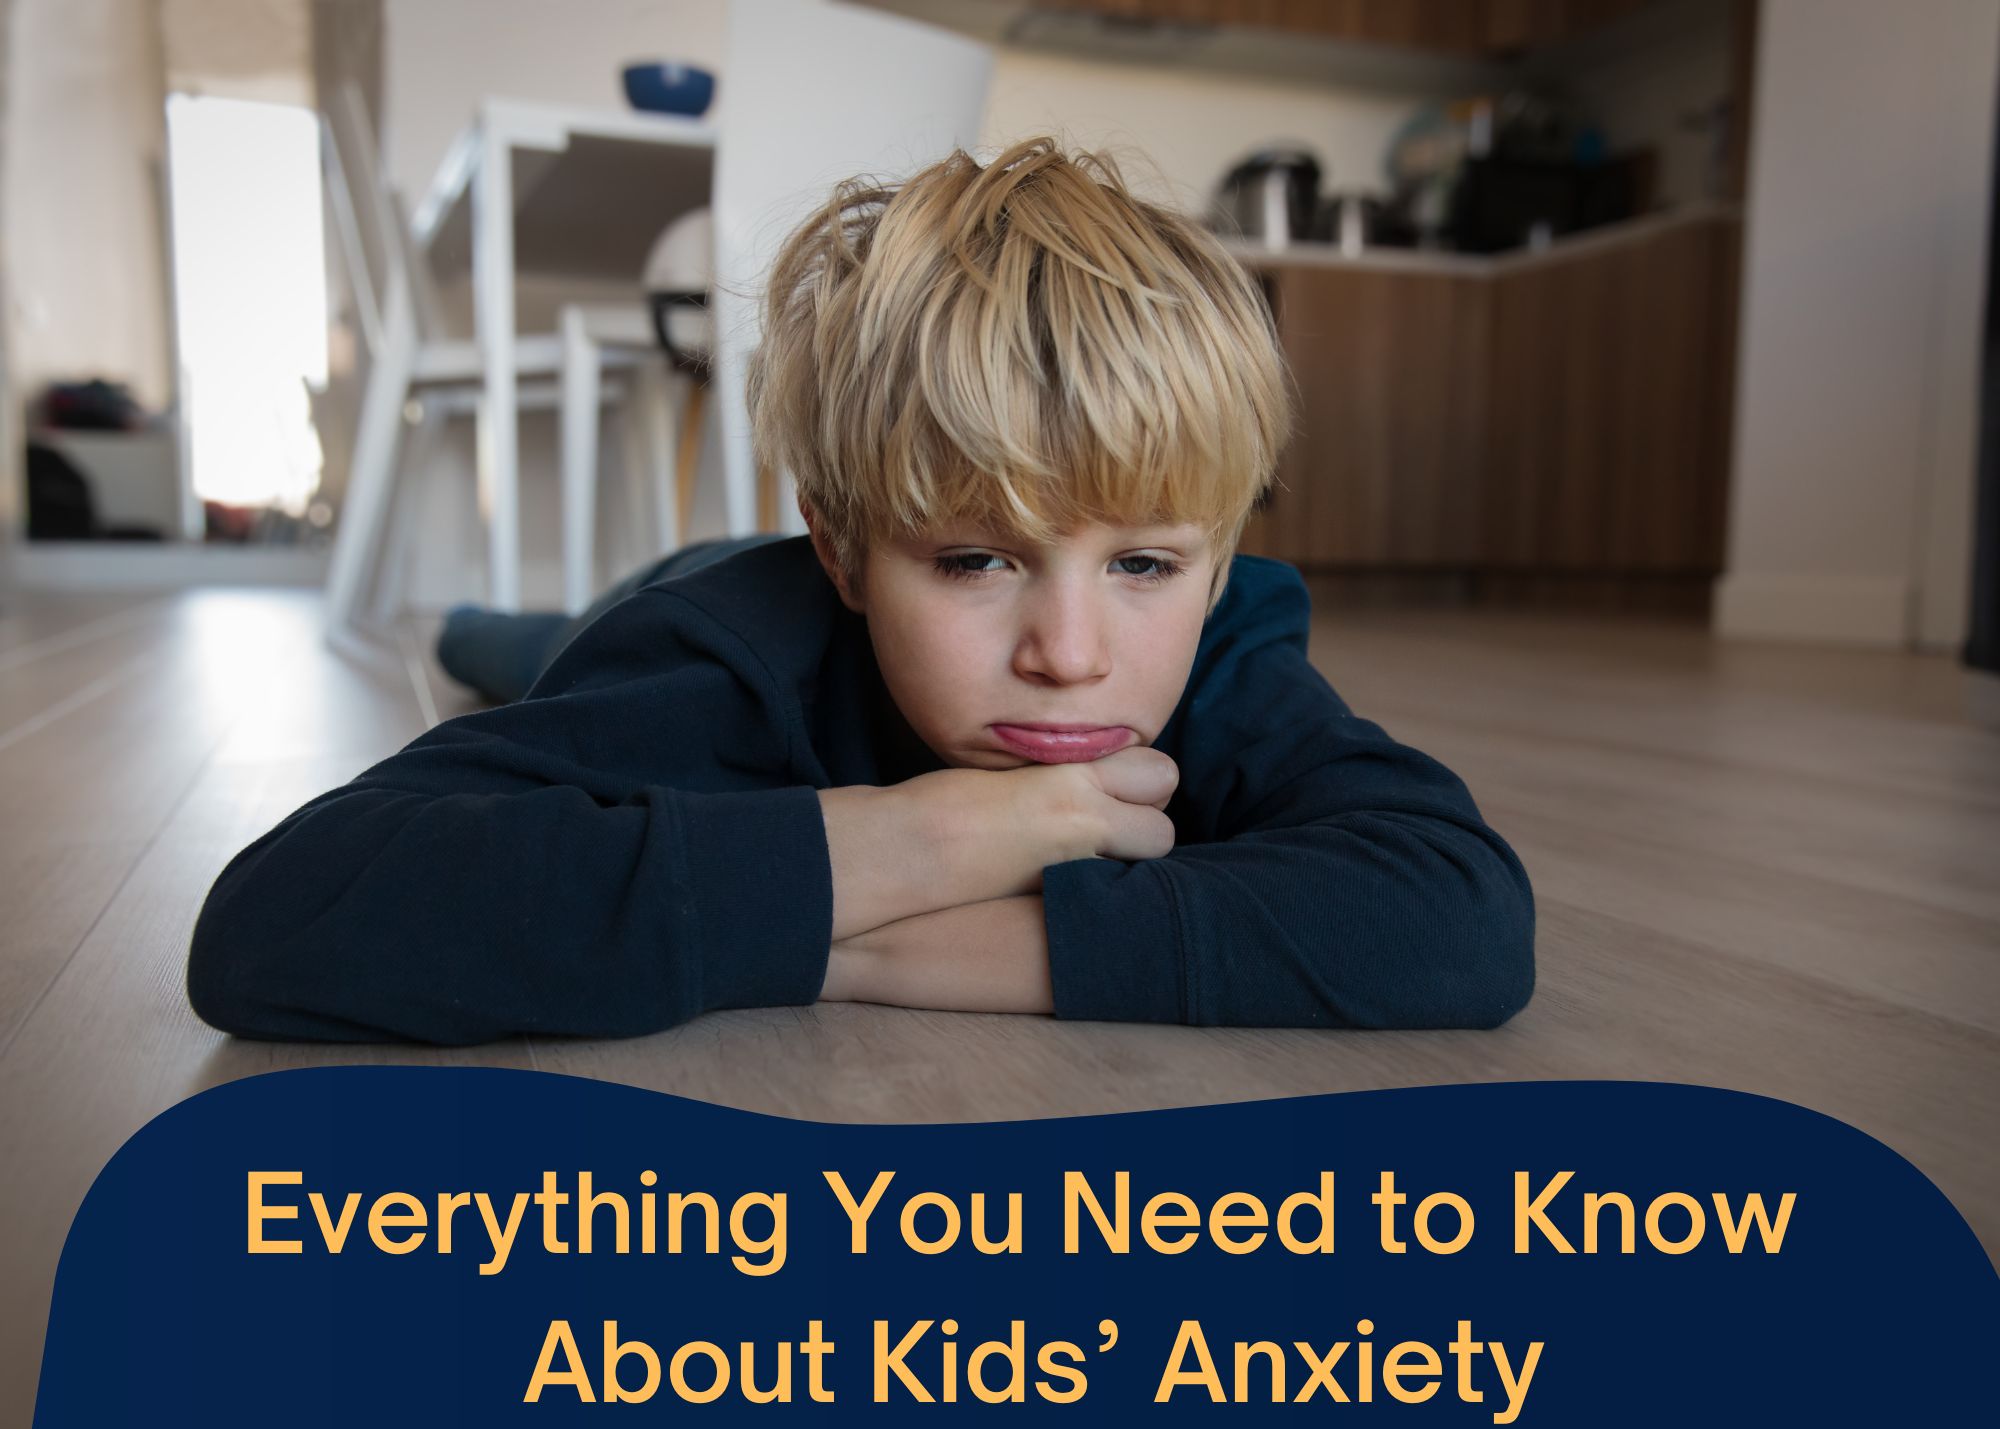 Everything You Need to Know About Kids’ Anxiety